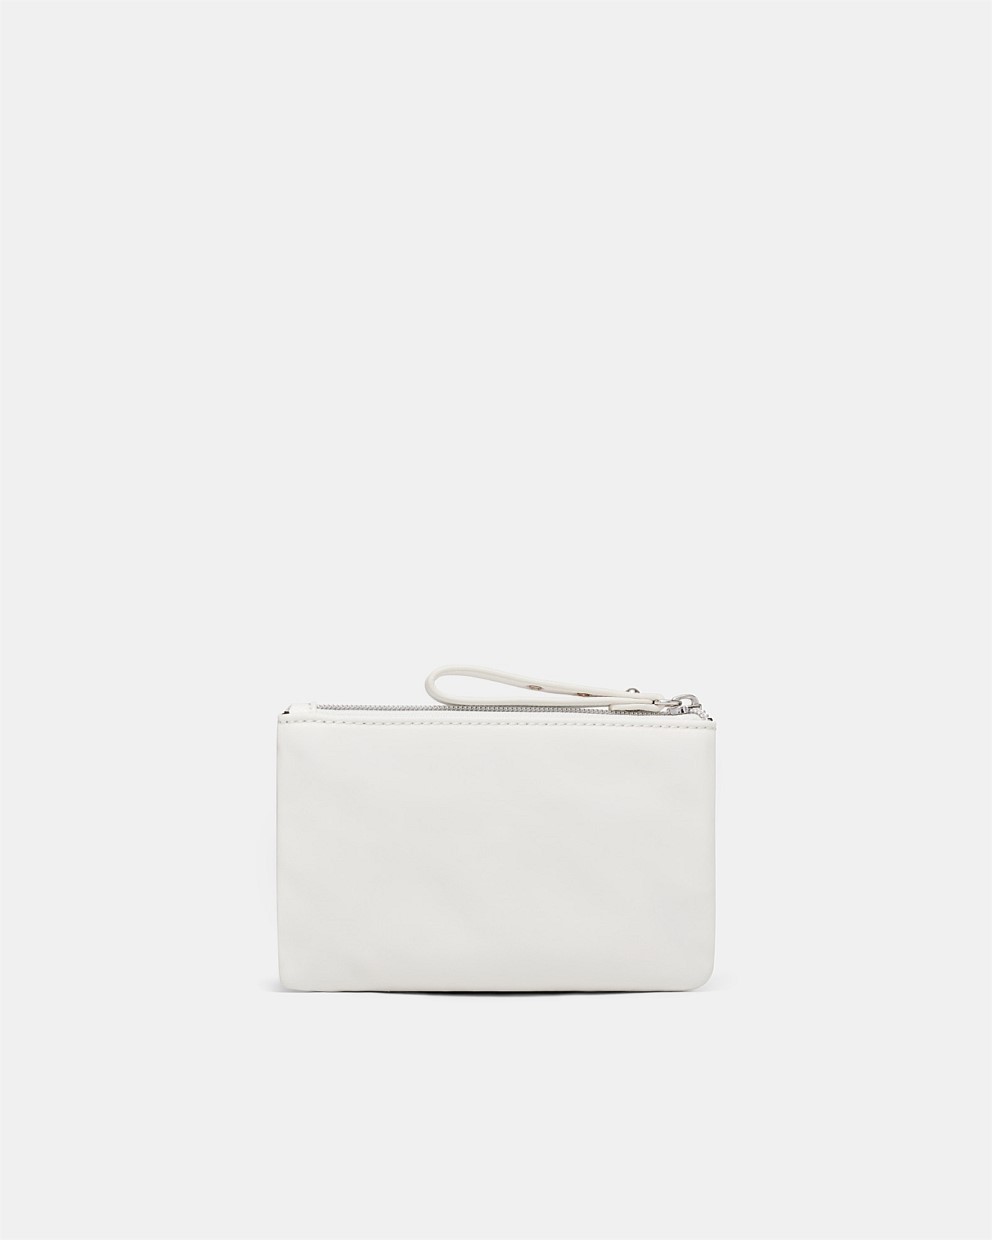 Off White Elements Pouch - Wallets & Pouches | Mimco